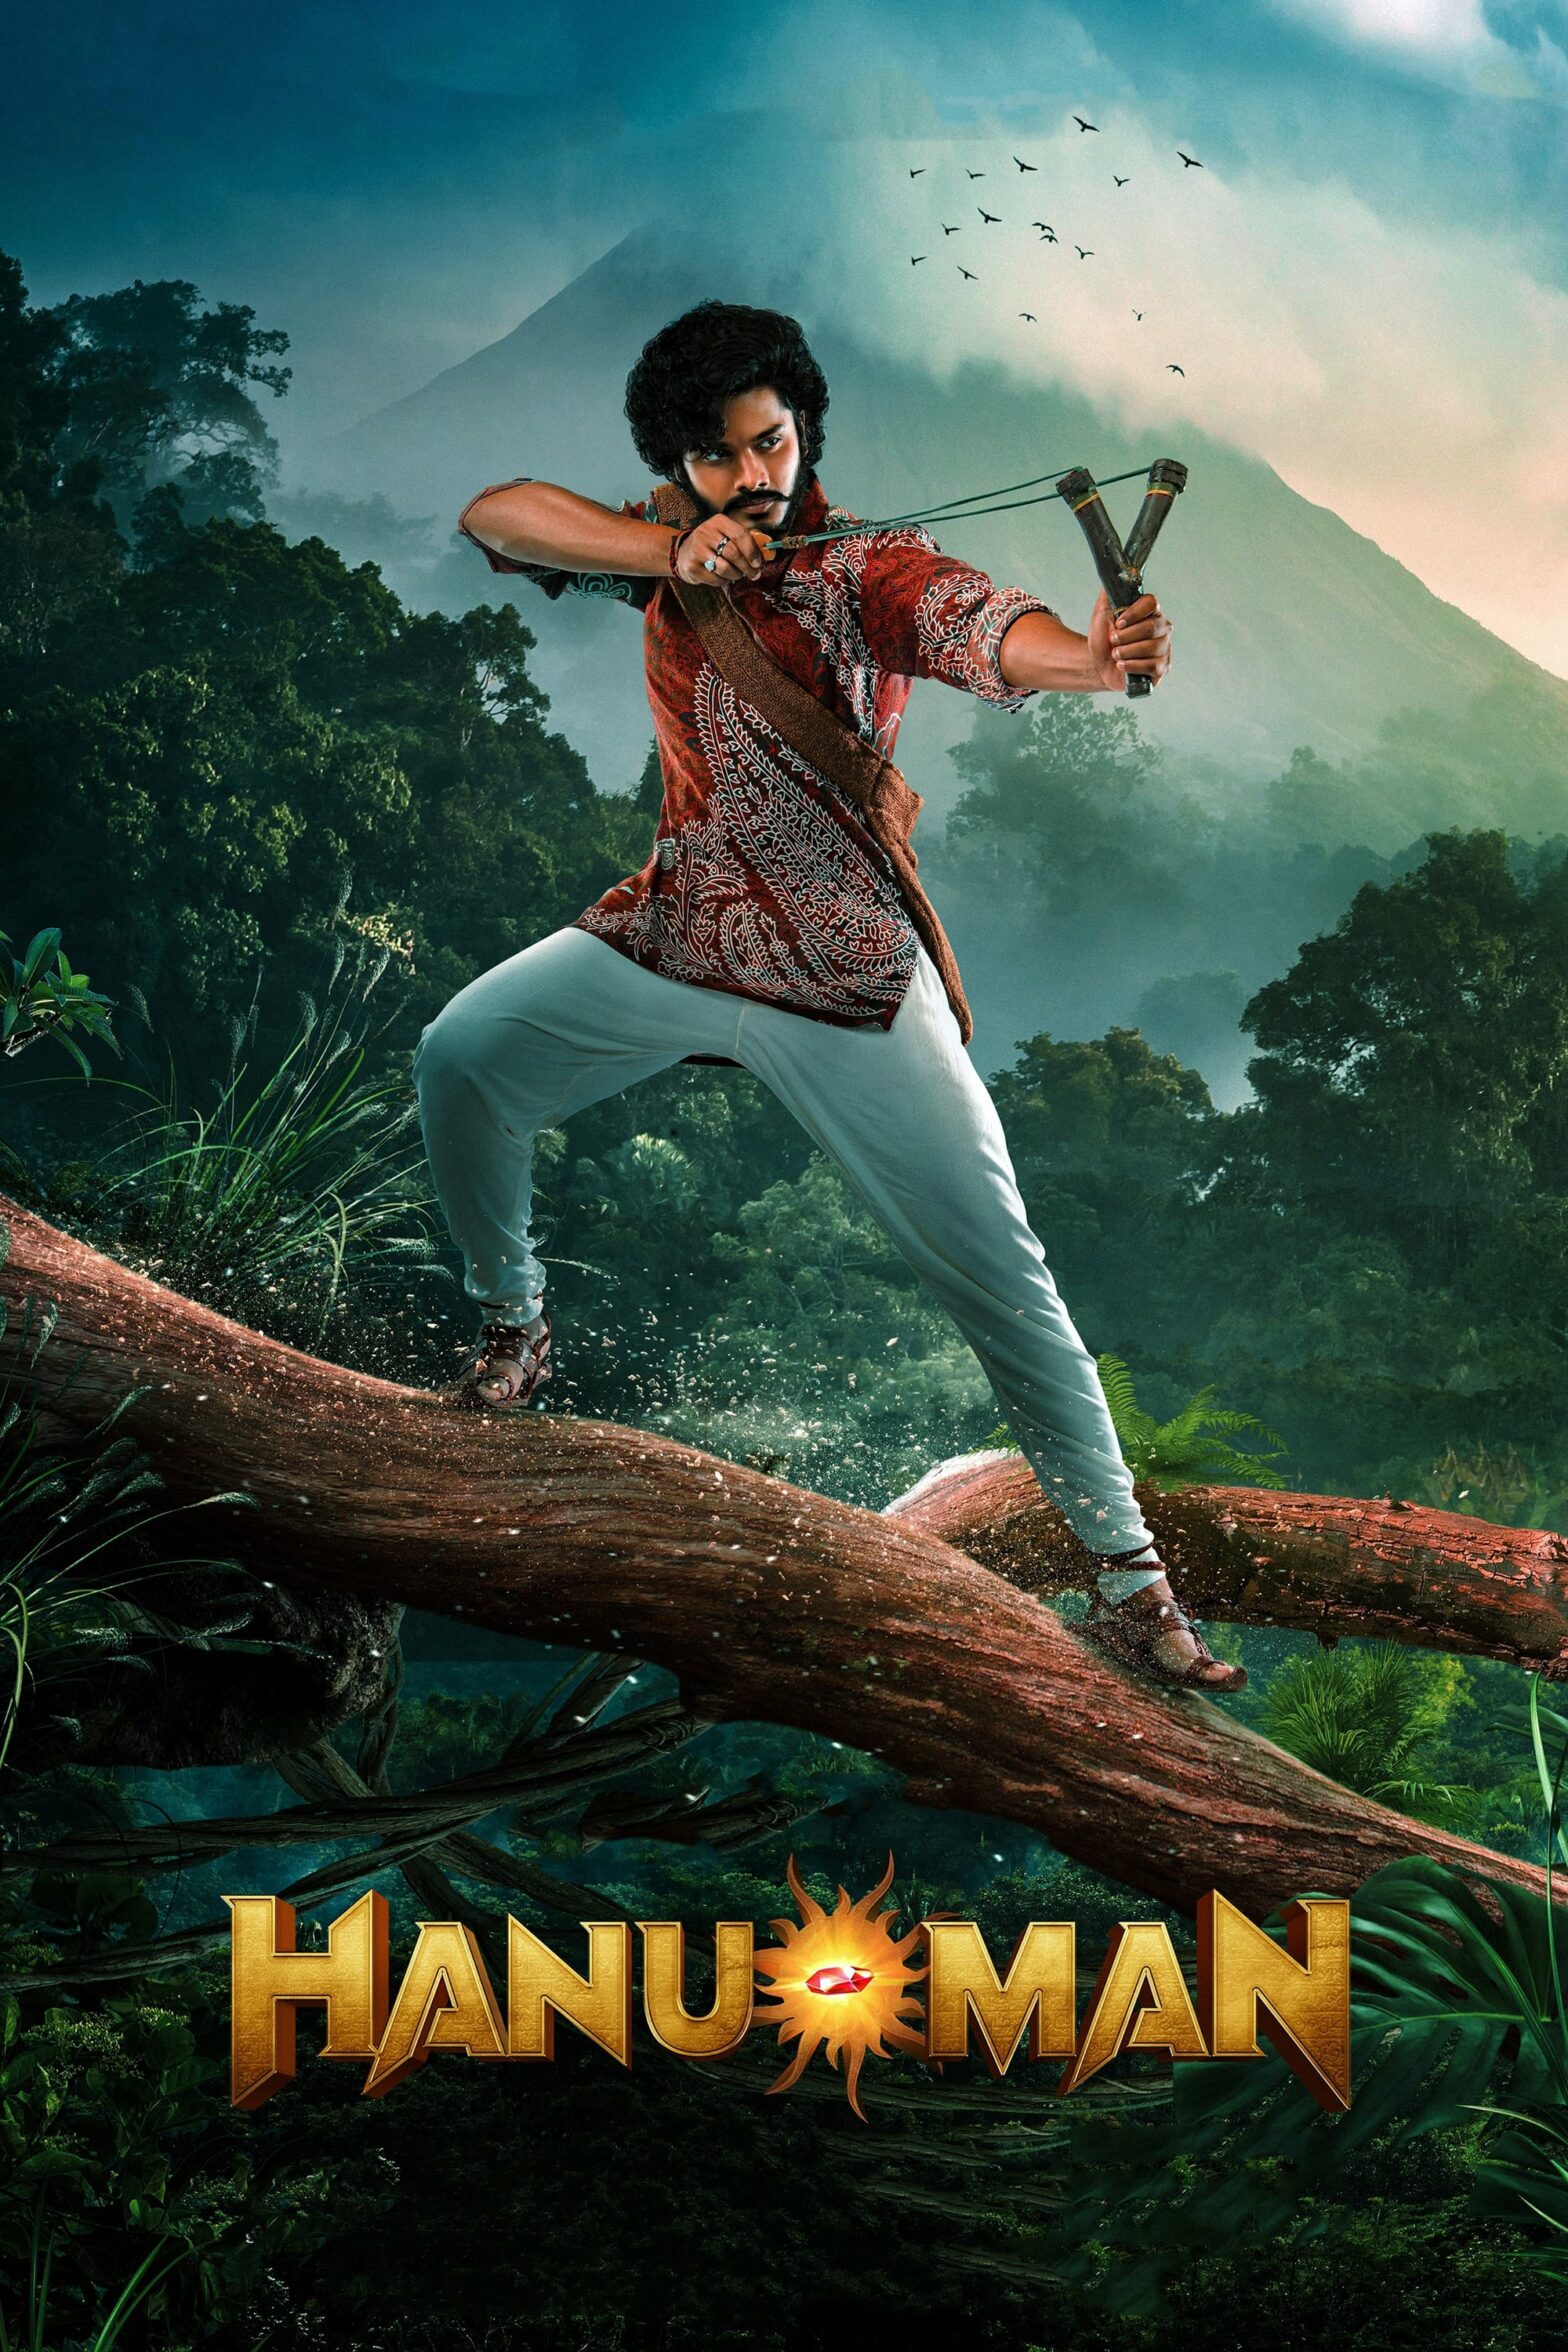 Poster for the movie "Hanu-Man"